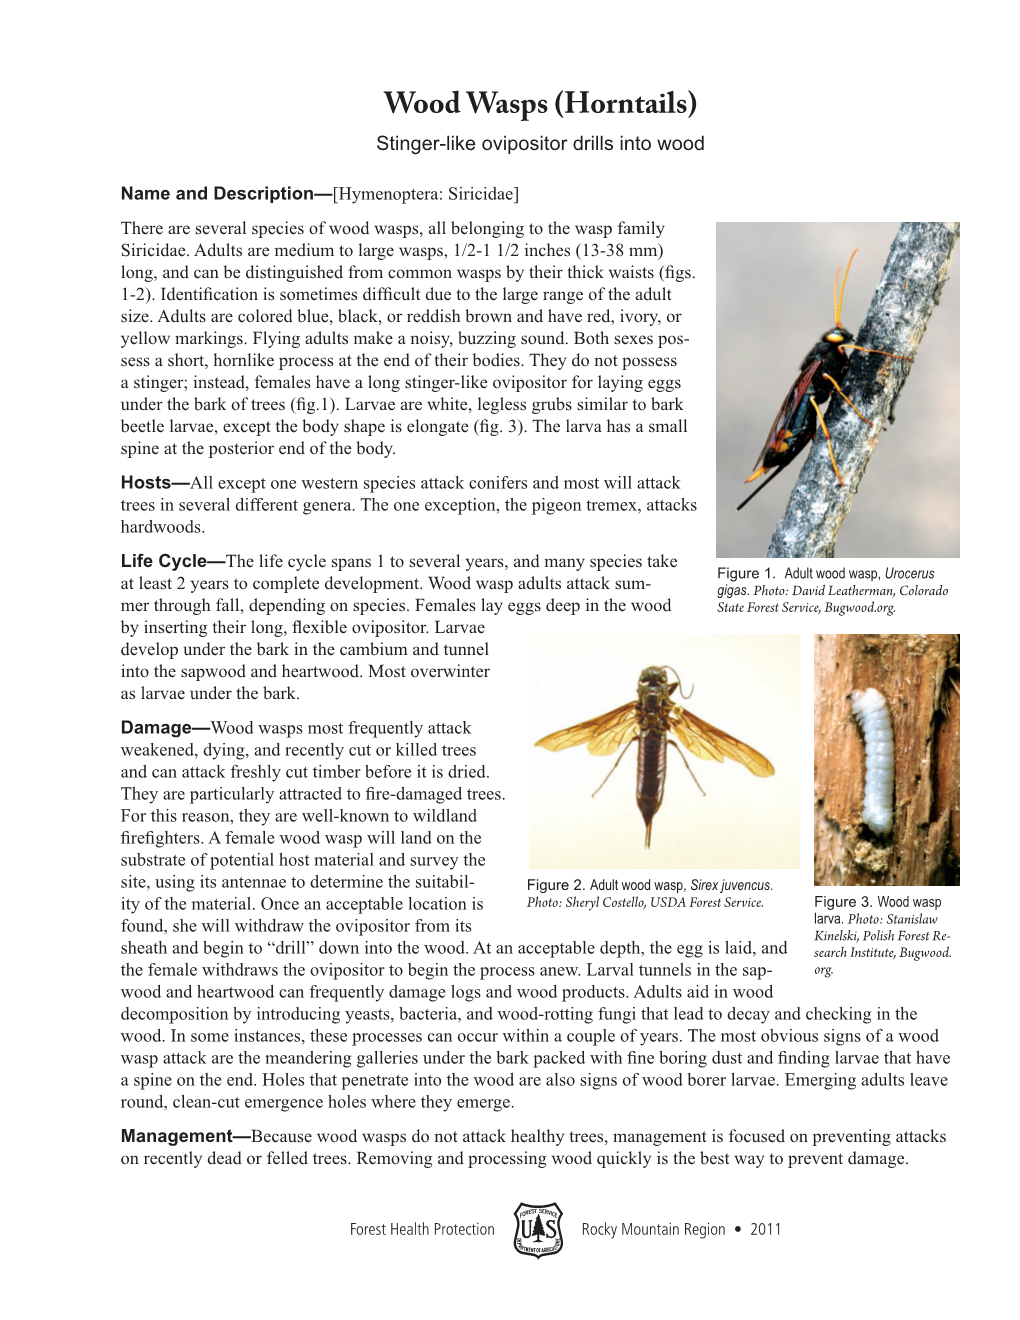 Wood Wasps (Horntails) Stinger-Like Ovipositor Drills Into Wood